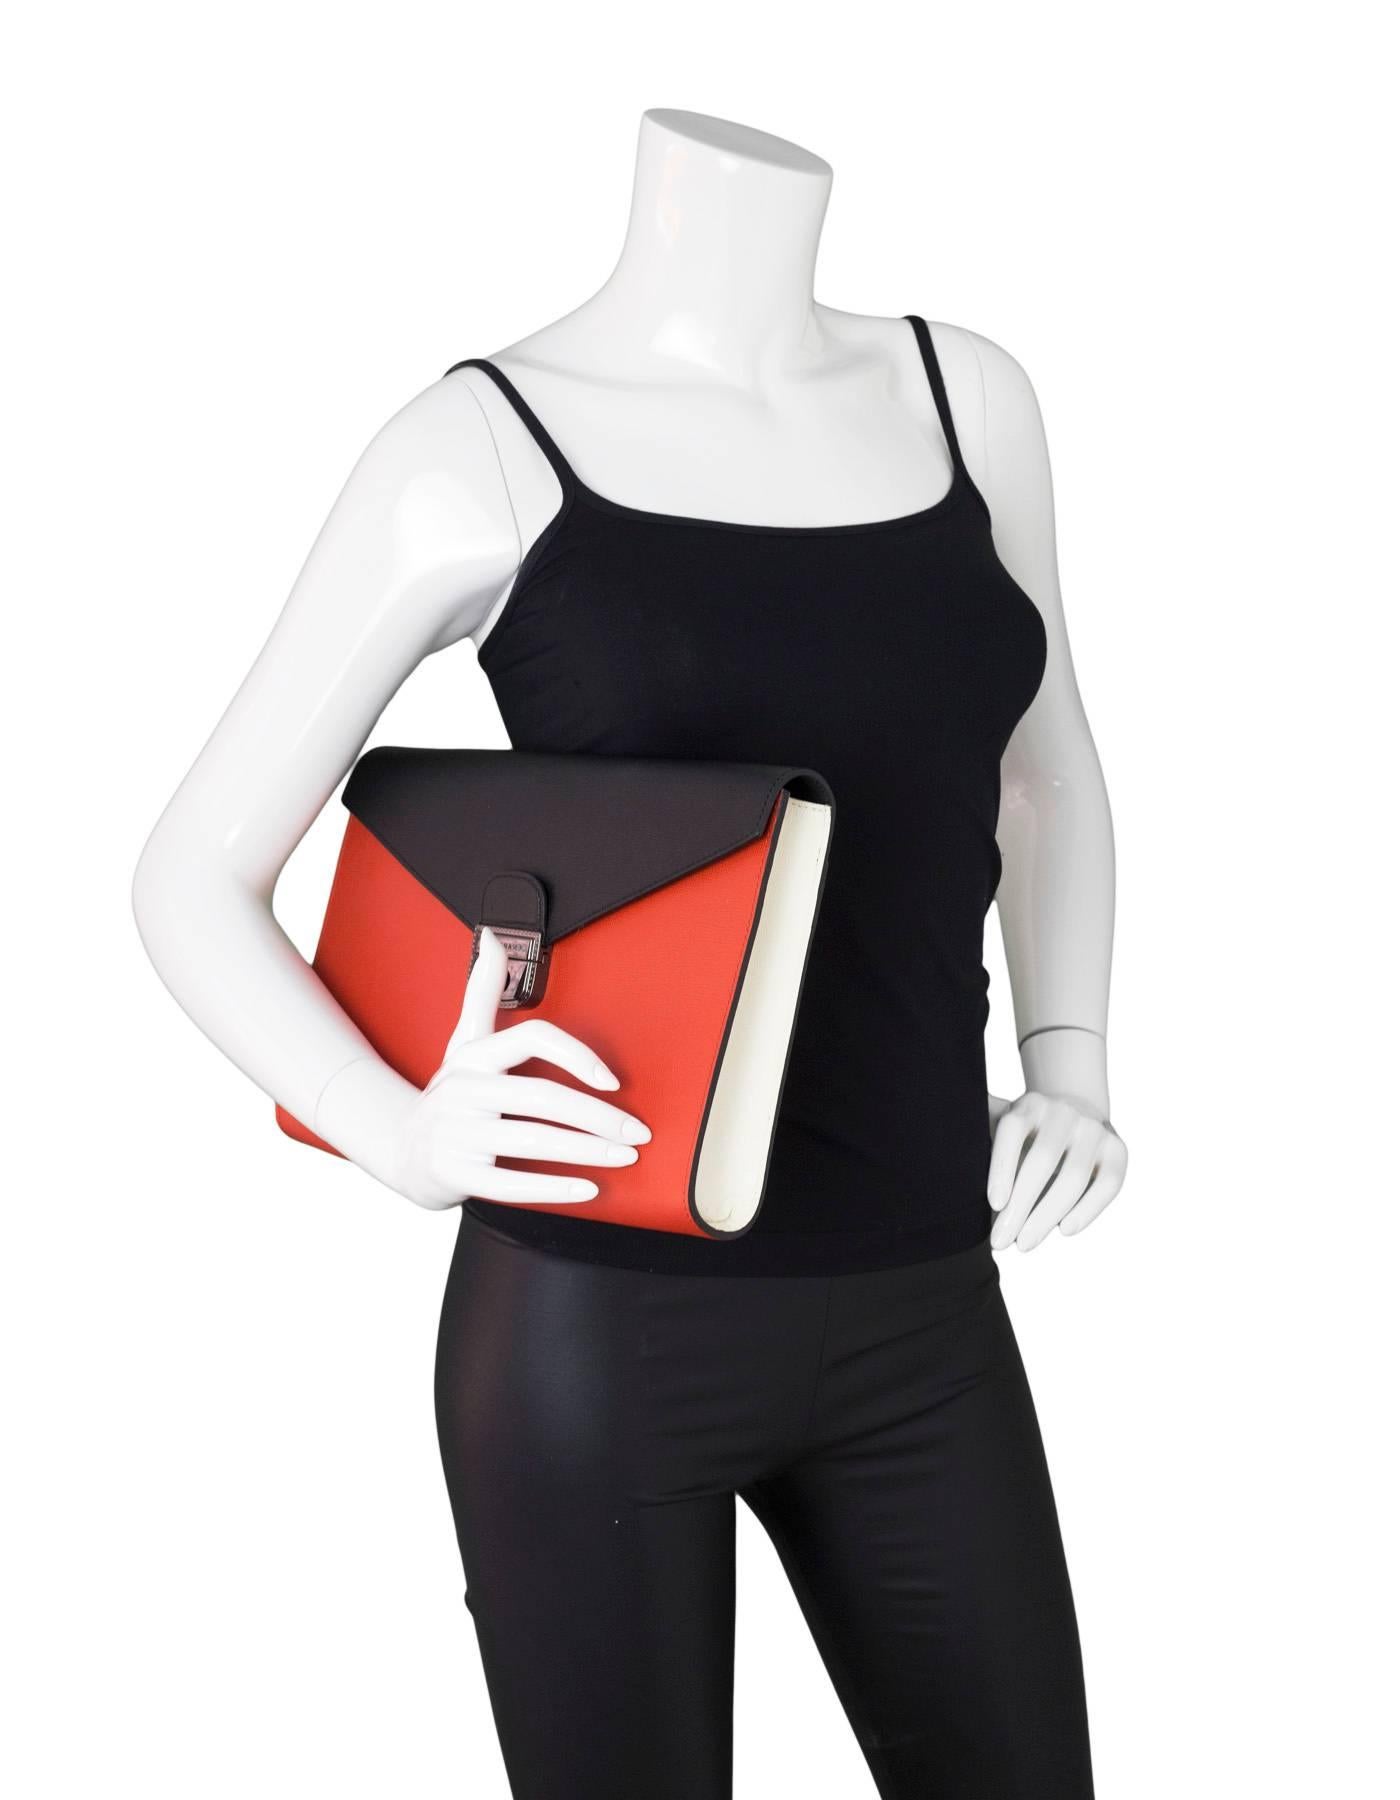 Longchamp Le Pliage Heritage Three-Tone Clutch

Made In: France
Color: Black, cream, red
Hardware: Gunmetal
Materials: Leather, metal
Lining: Black textile
Closure/Opening: Flap top with push-lock closure
Exterior Pockets: Snap pocket at